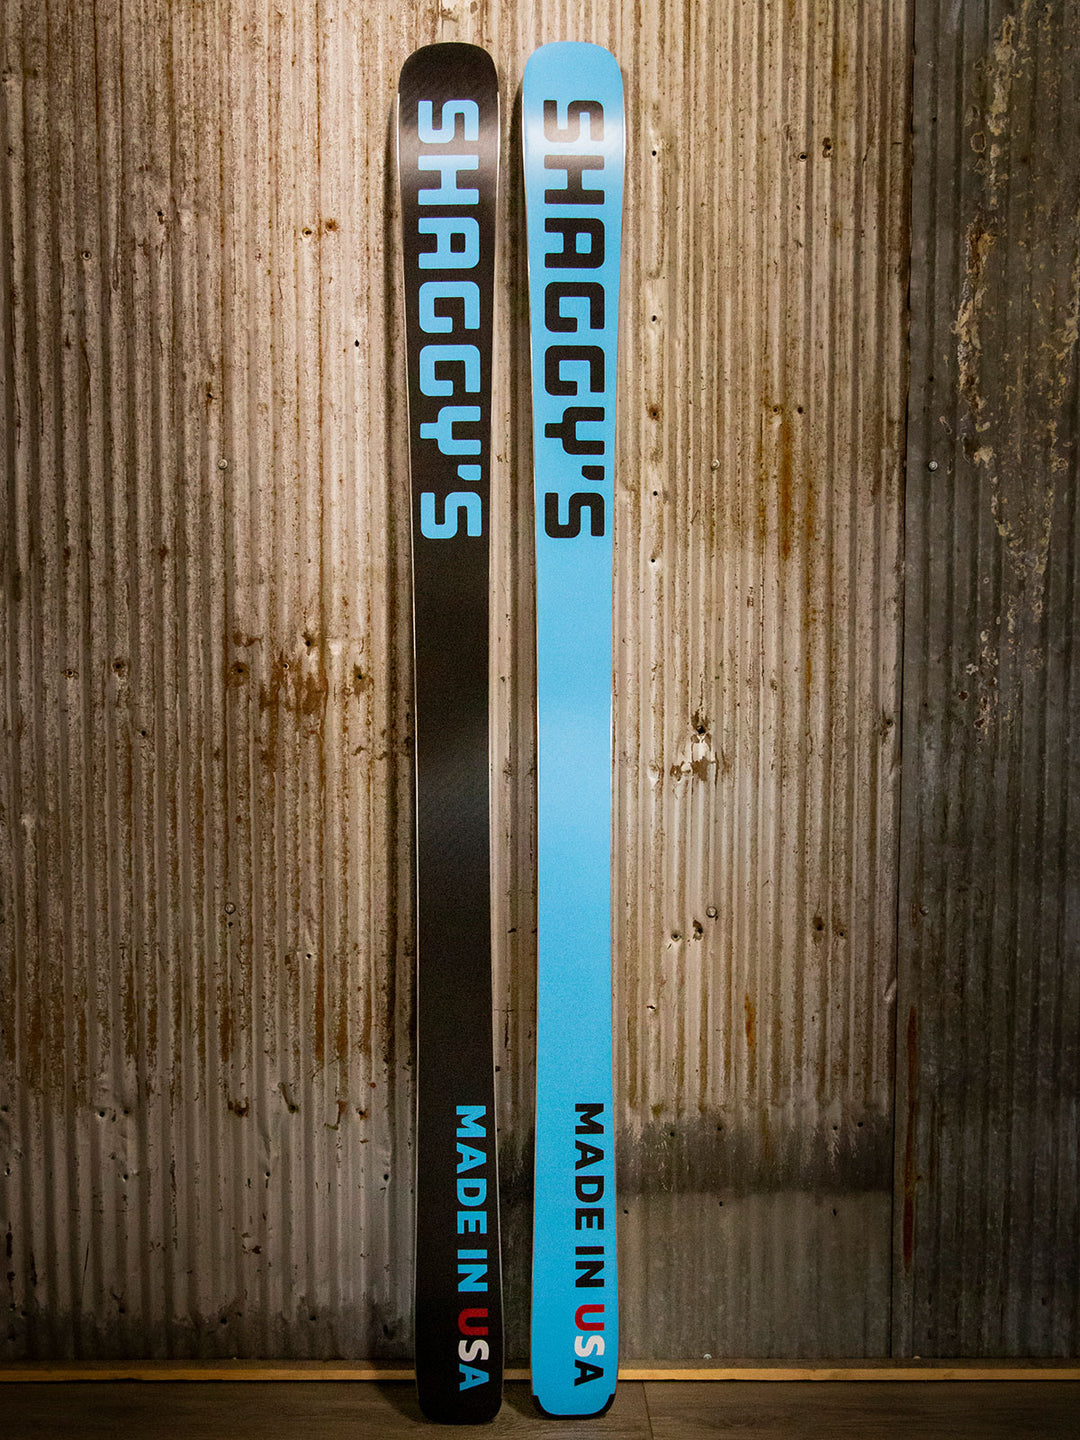 In Stock - Limited Edition America! Skis